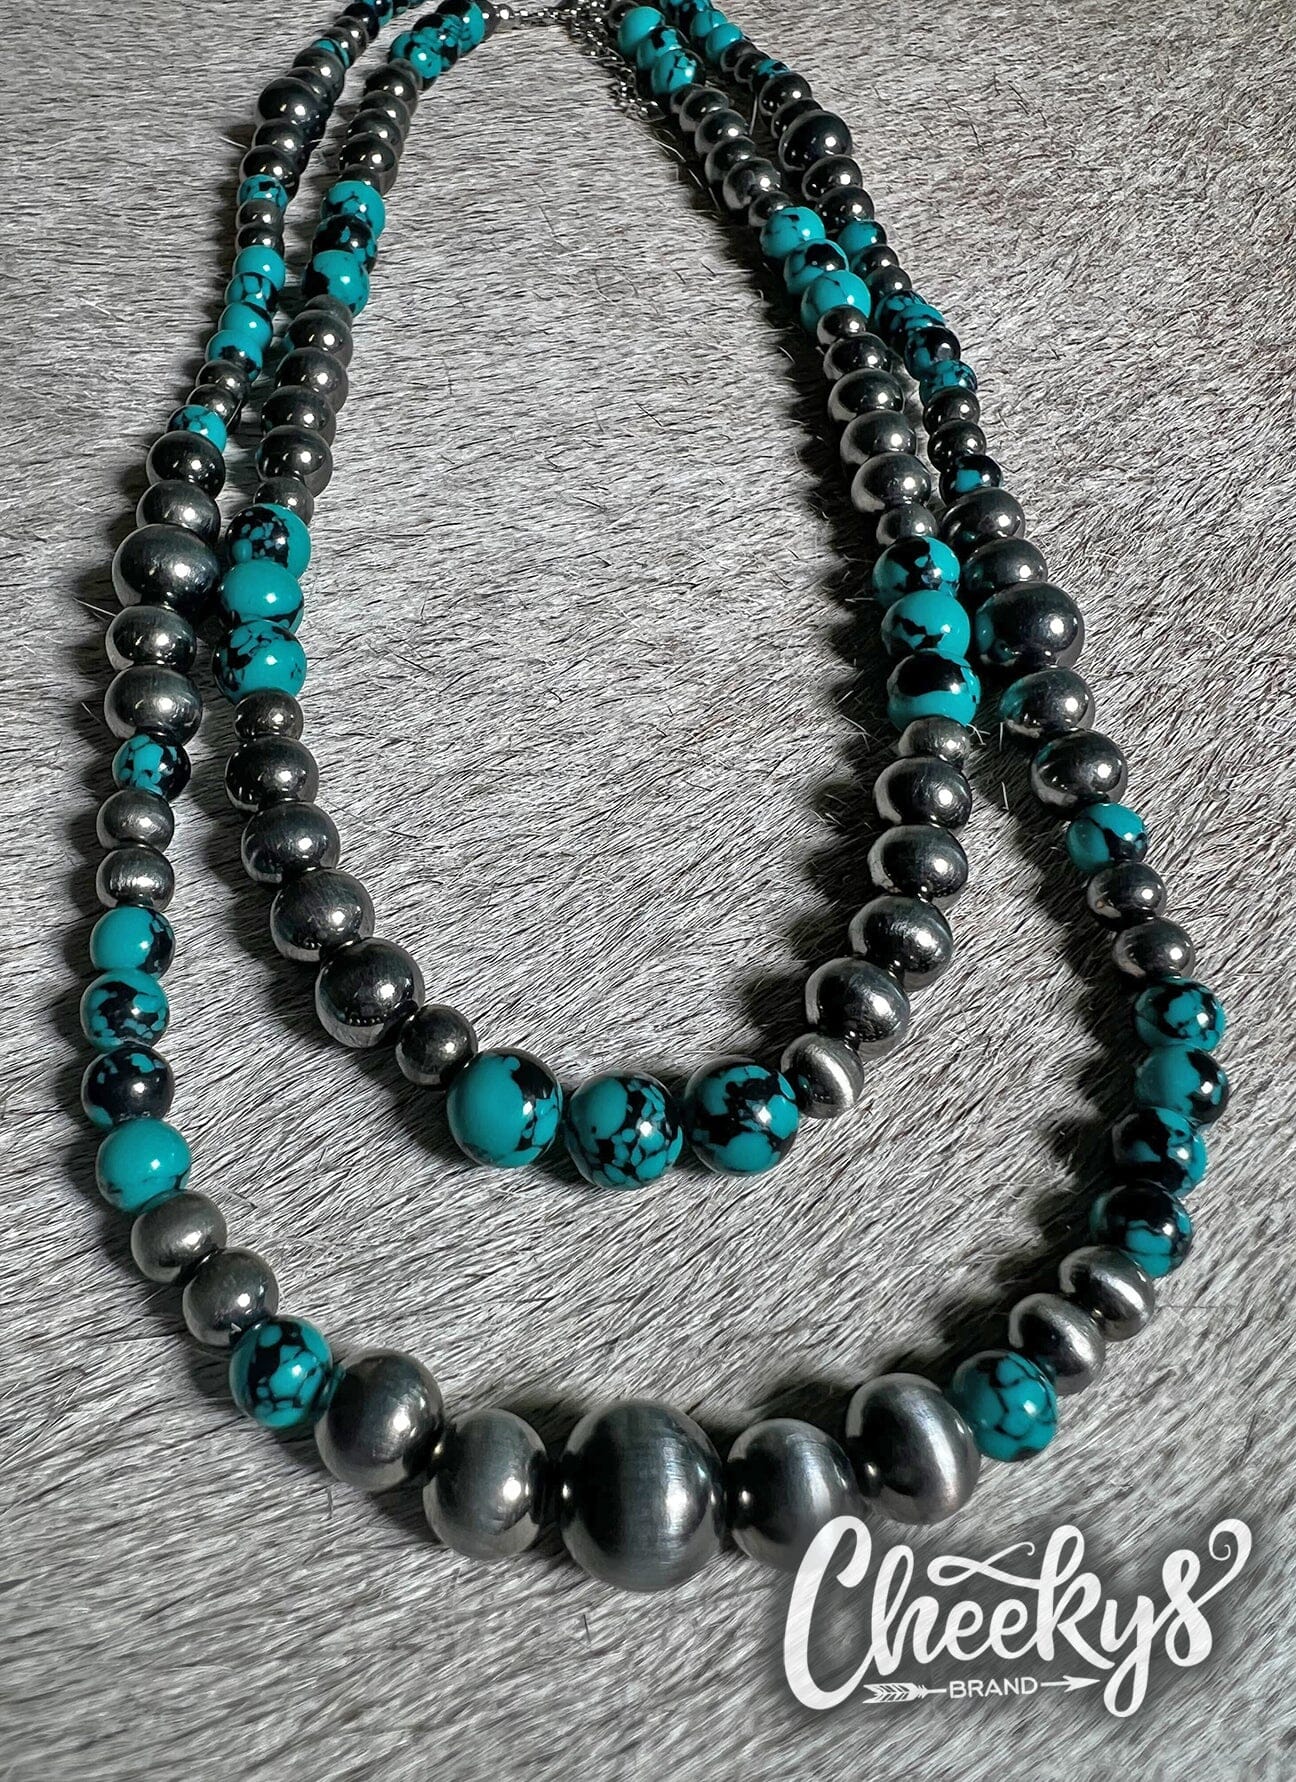 Teal/Blk Navajo Pearl 2pc Necklace Cheekys Brand 